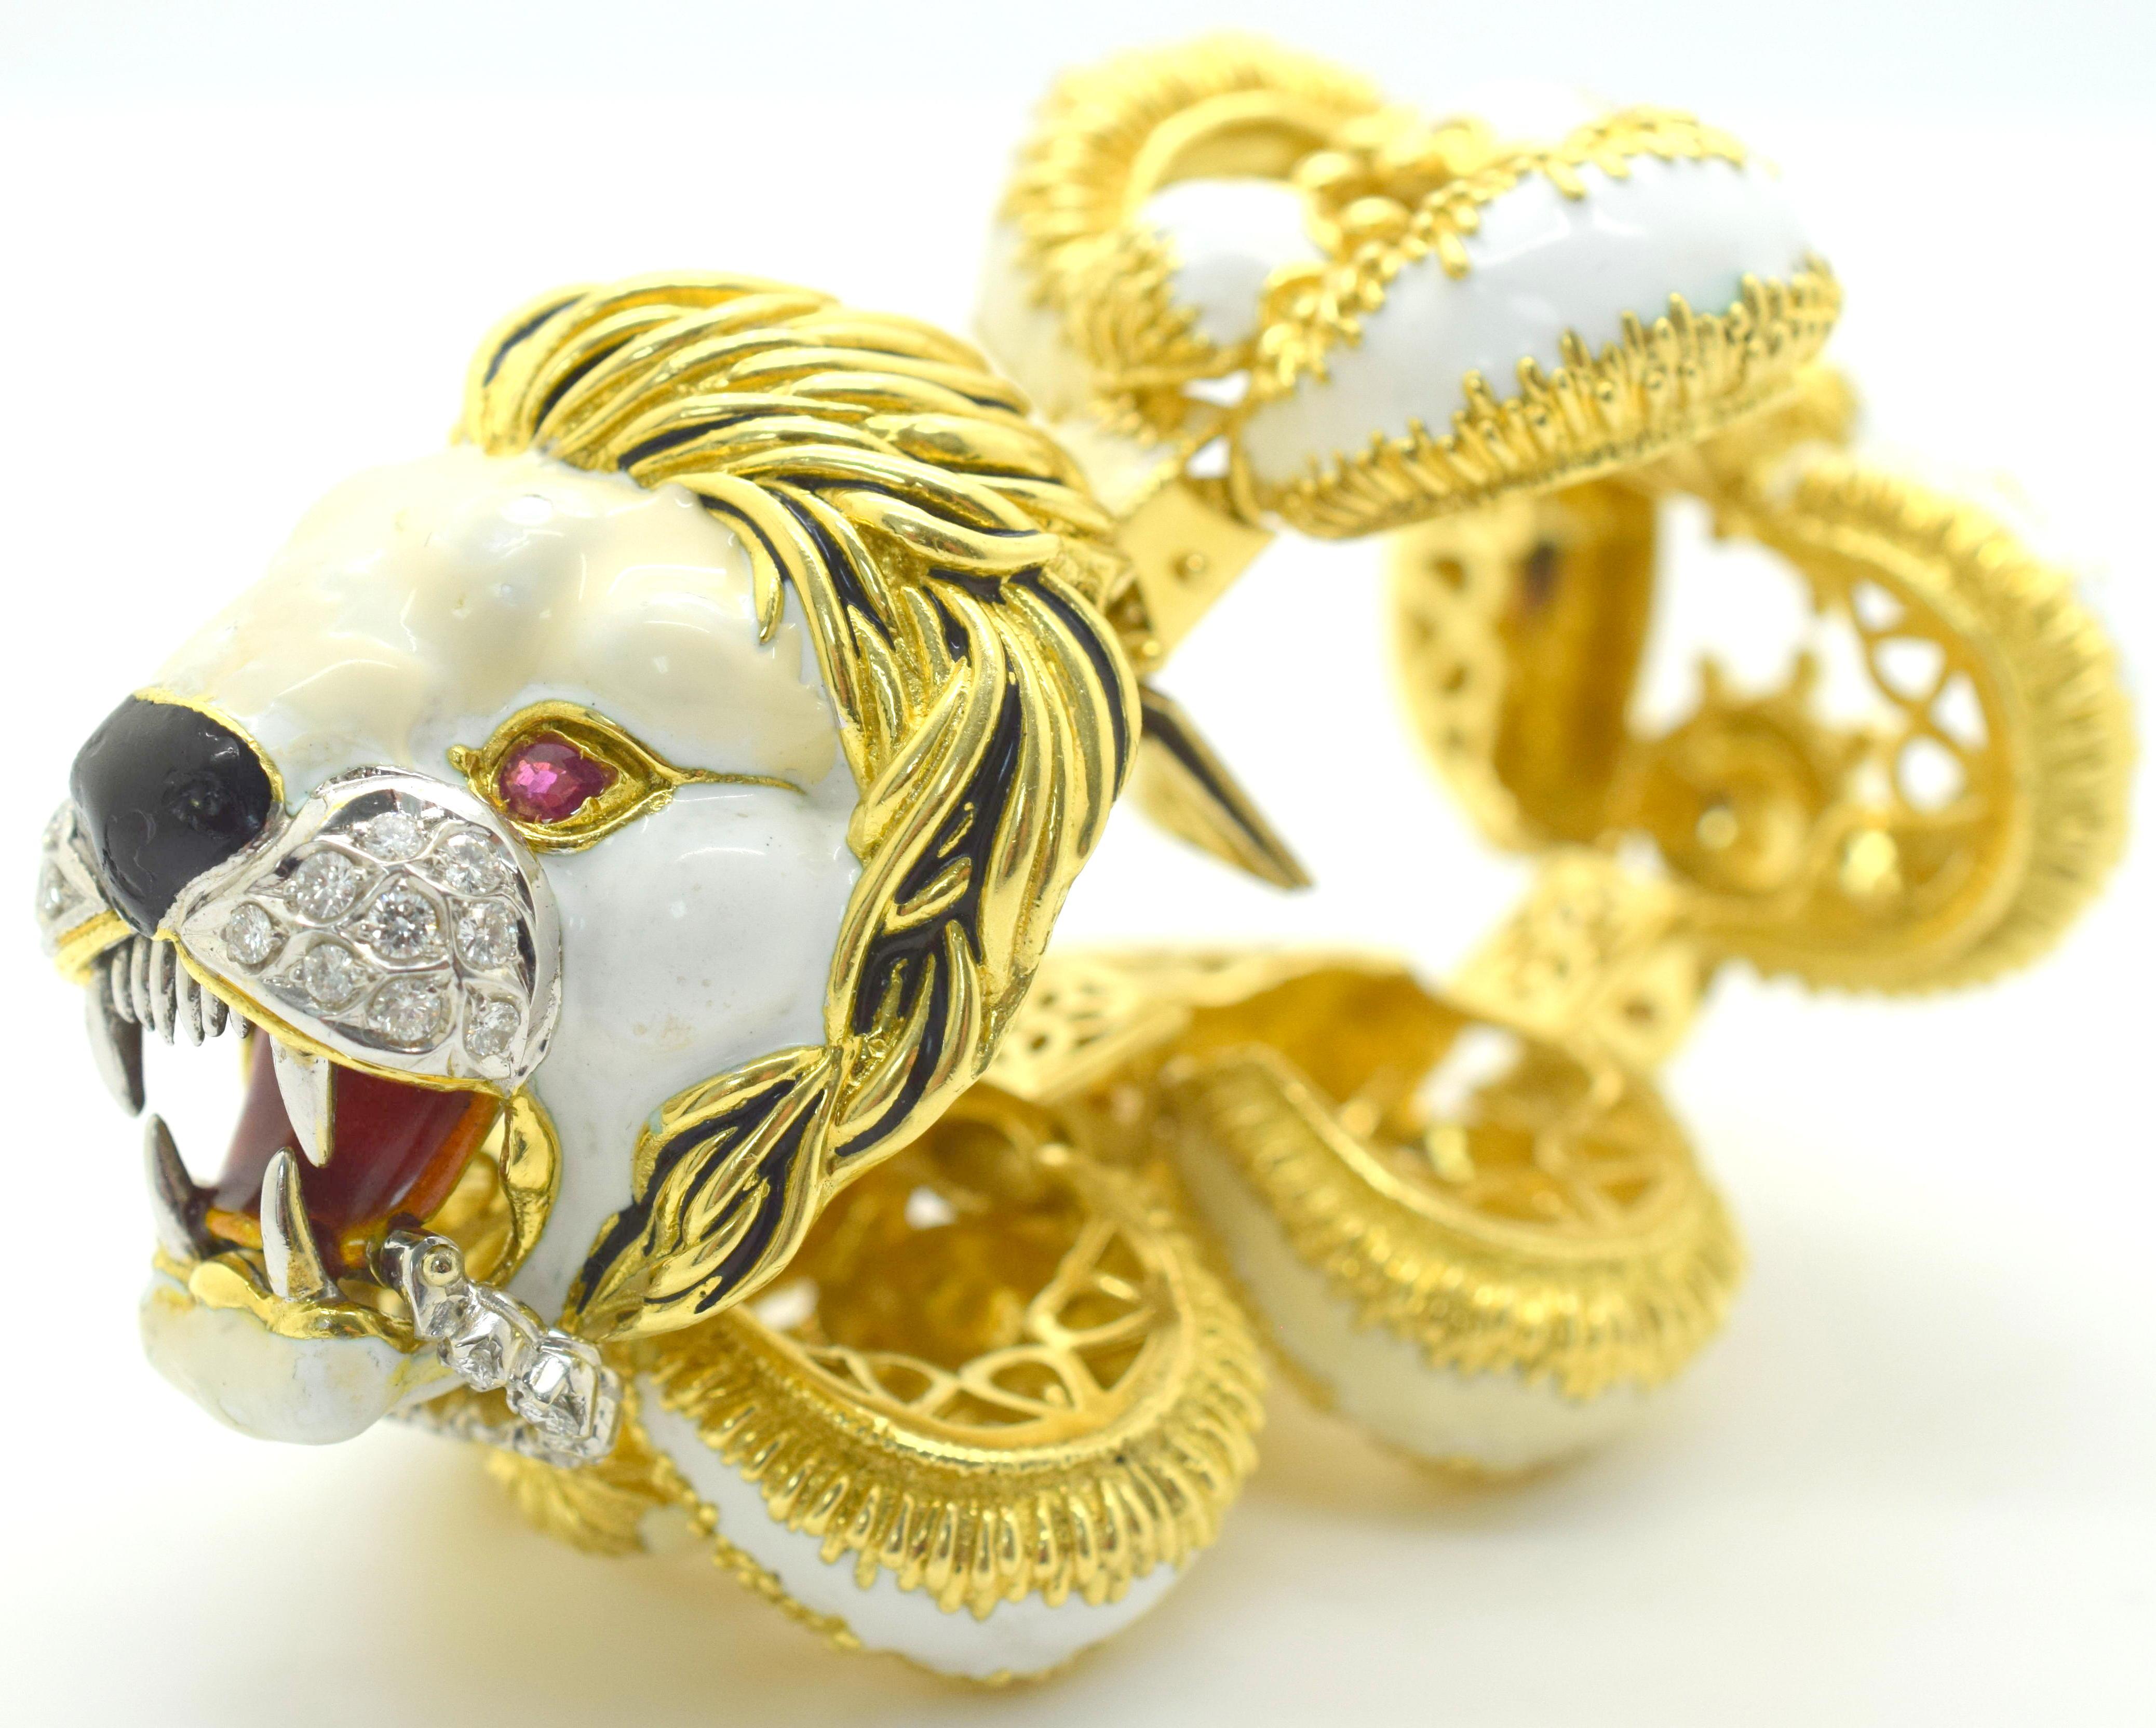 Gorgeous detail on this Franscarolo enamel Diamond & Ruby gold lion bracelet. Details on this piece are phenomenal. Four exquisite oval links are crafted in 18k yellow gold with enamel seen throughout. Interlocking claw designs are seen through each